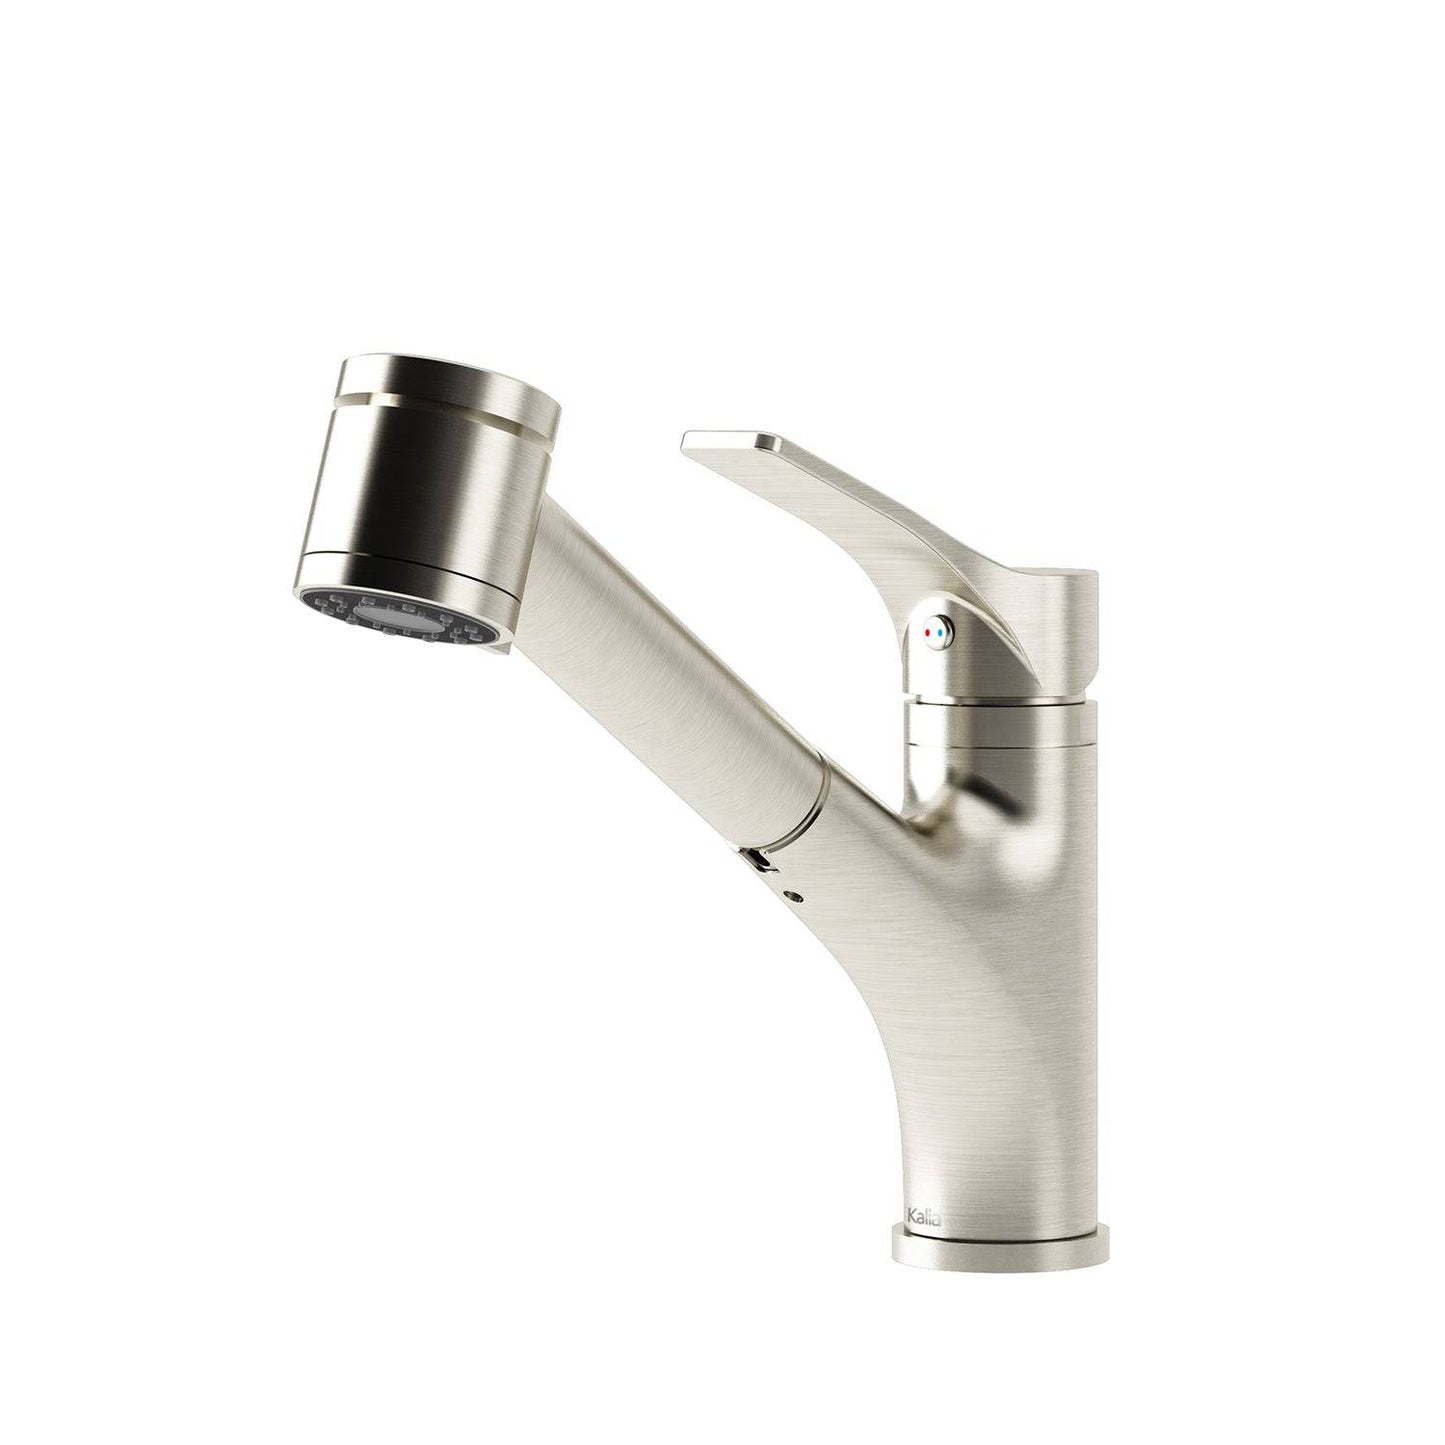 Kalia DEKA surfer 8.75" Single Handle Kitchen Faucet Pull-Out Dual Spray -Stainless Steel PVD